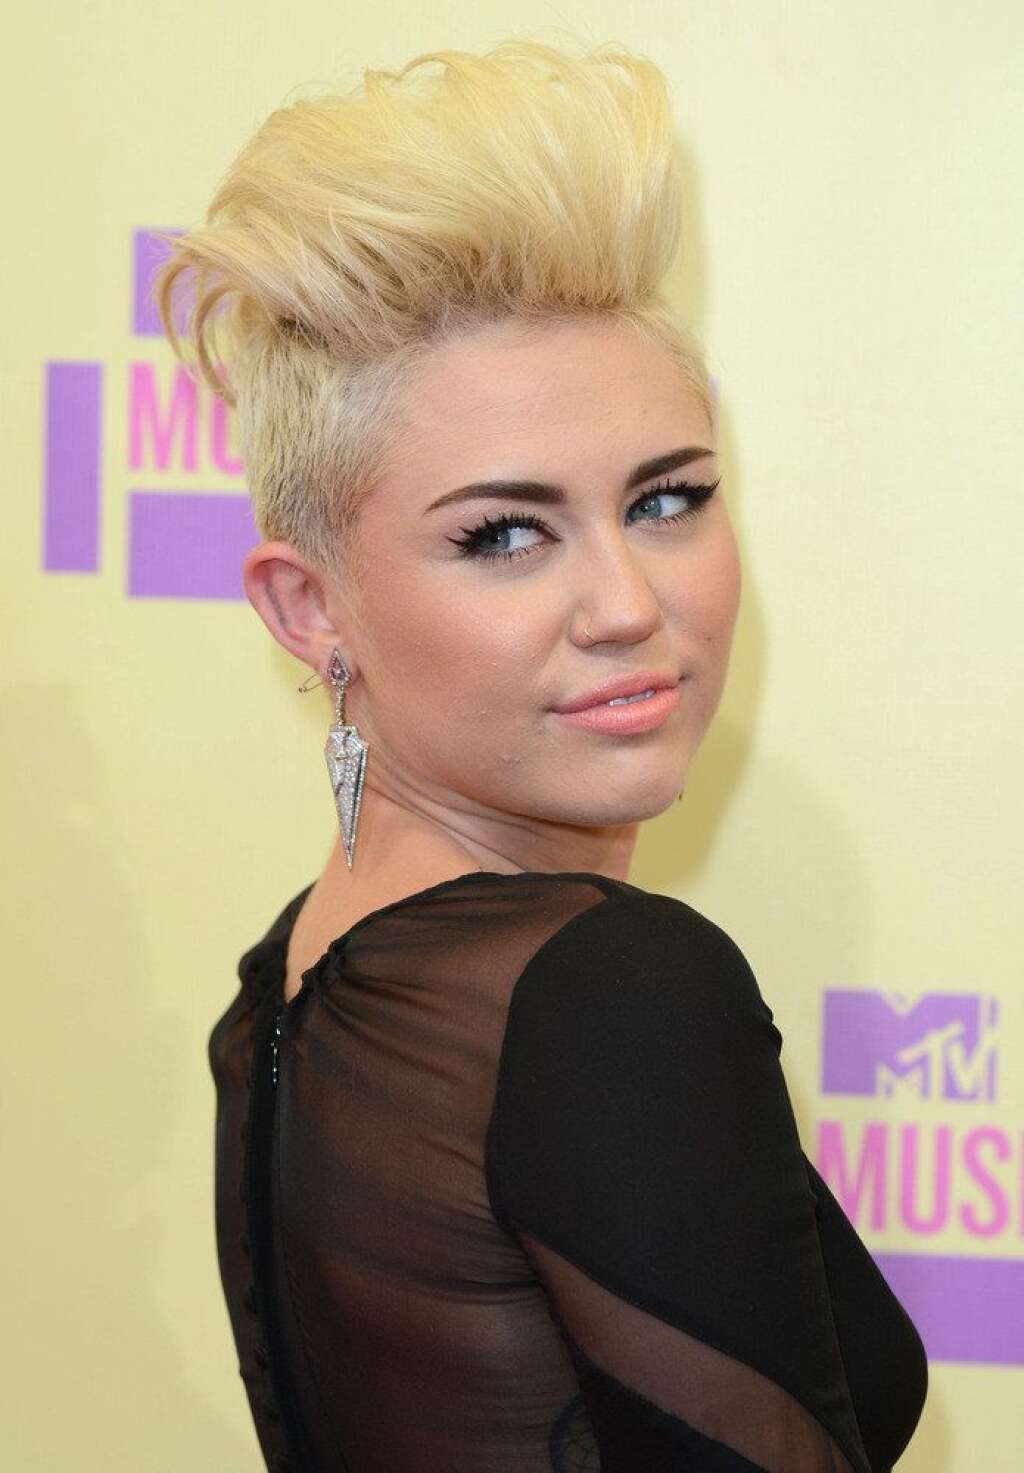 MTV VMA 2012 Arrivals - Los Angeles - Miley Cyrus arriving at the MTV Video Music Awards at the Staples Centre, Los Angeles.